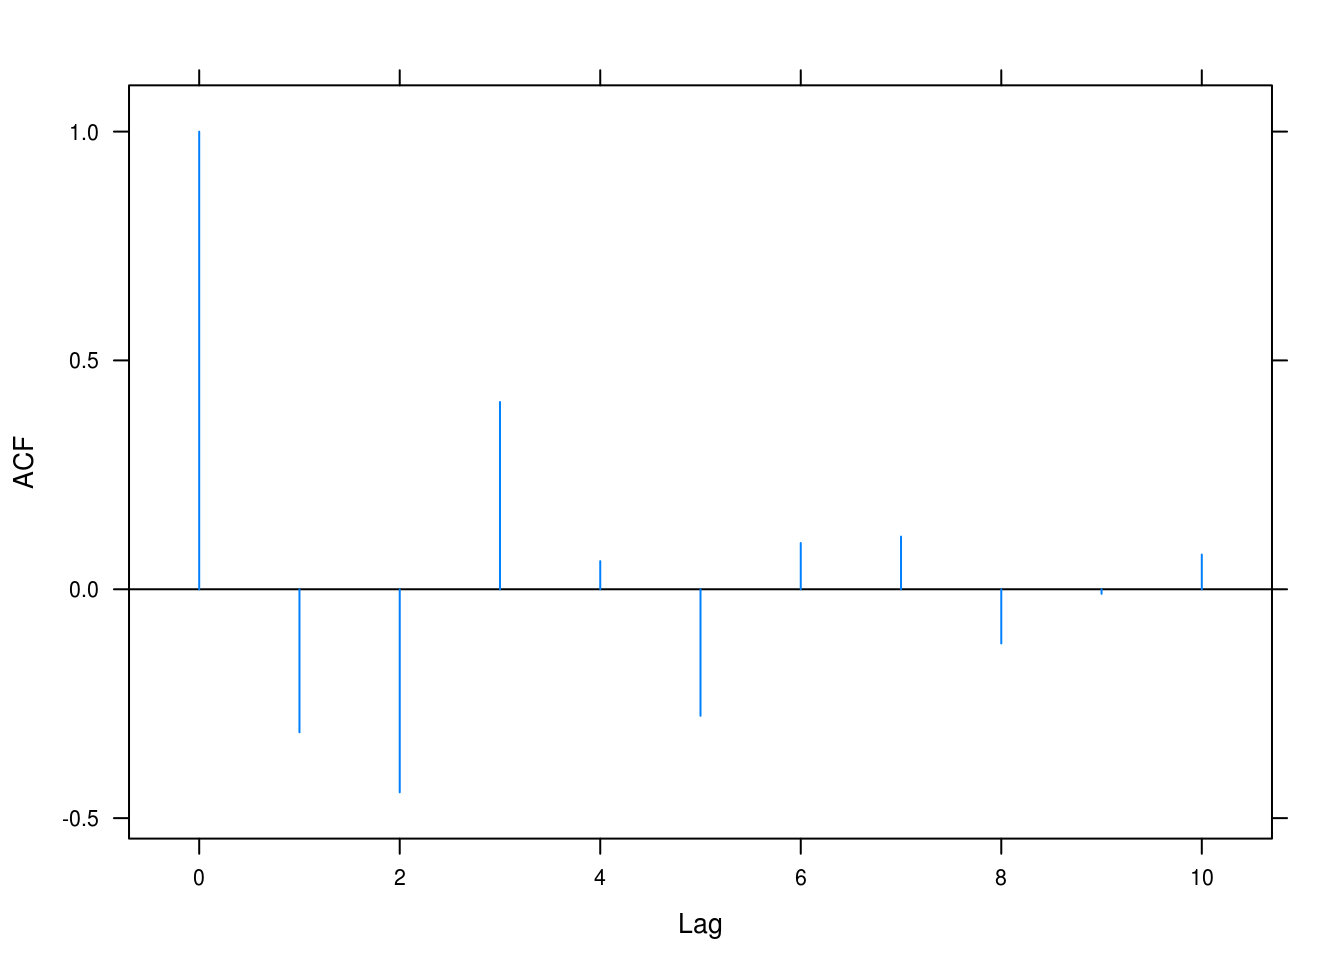 ACF for AR(2) with $\phi_1 = -0.5, \phi_2 = -0.6$.